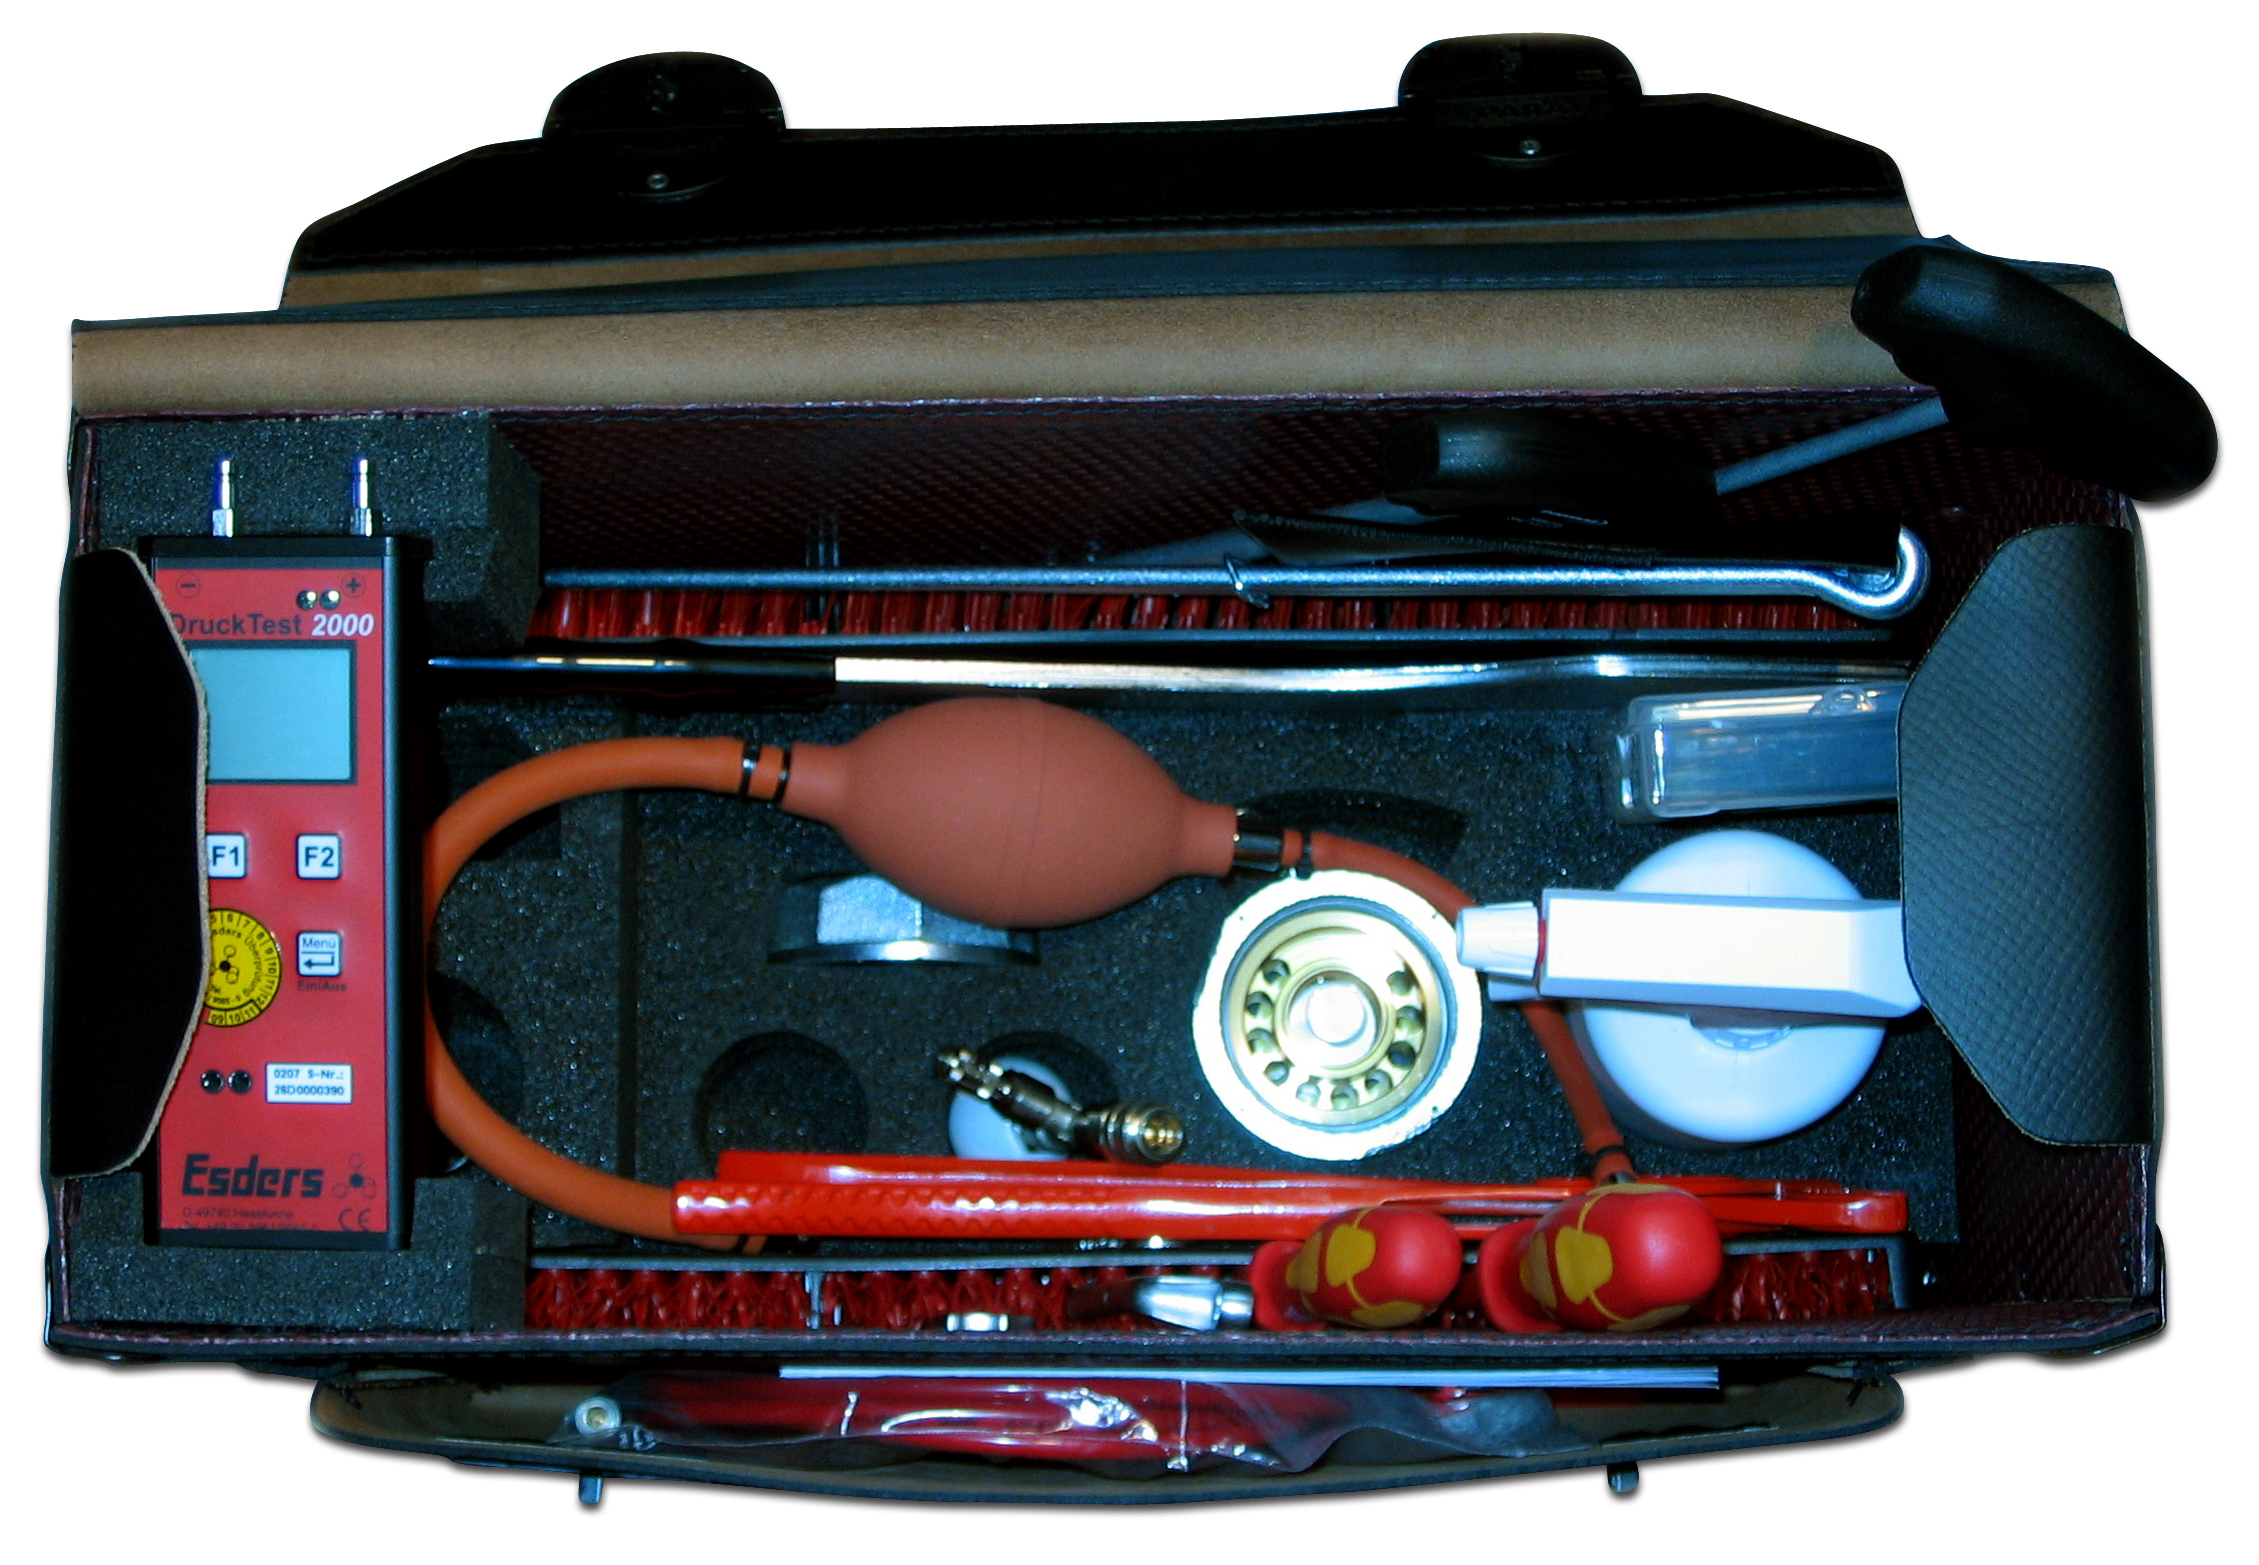 Leather toolbox with insert for
DruckTest 2000, LeckOmiO, VibraGas